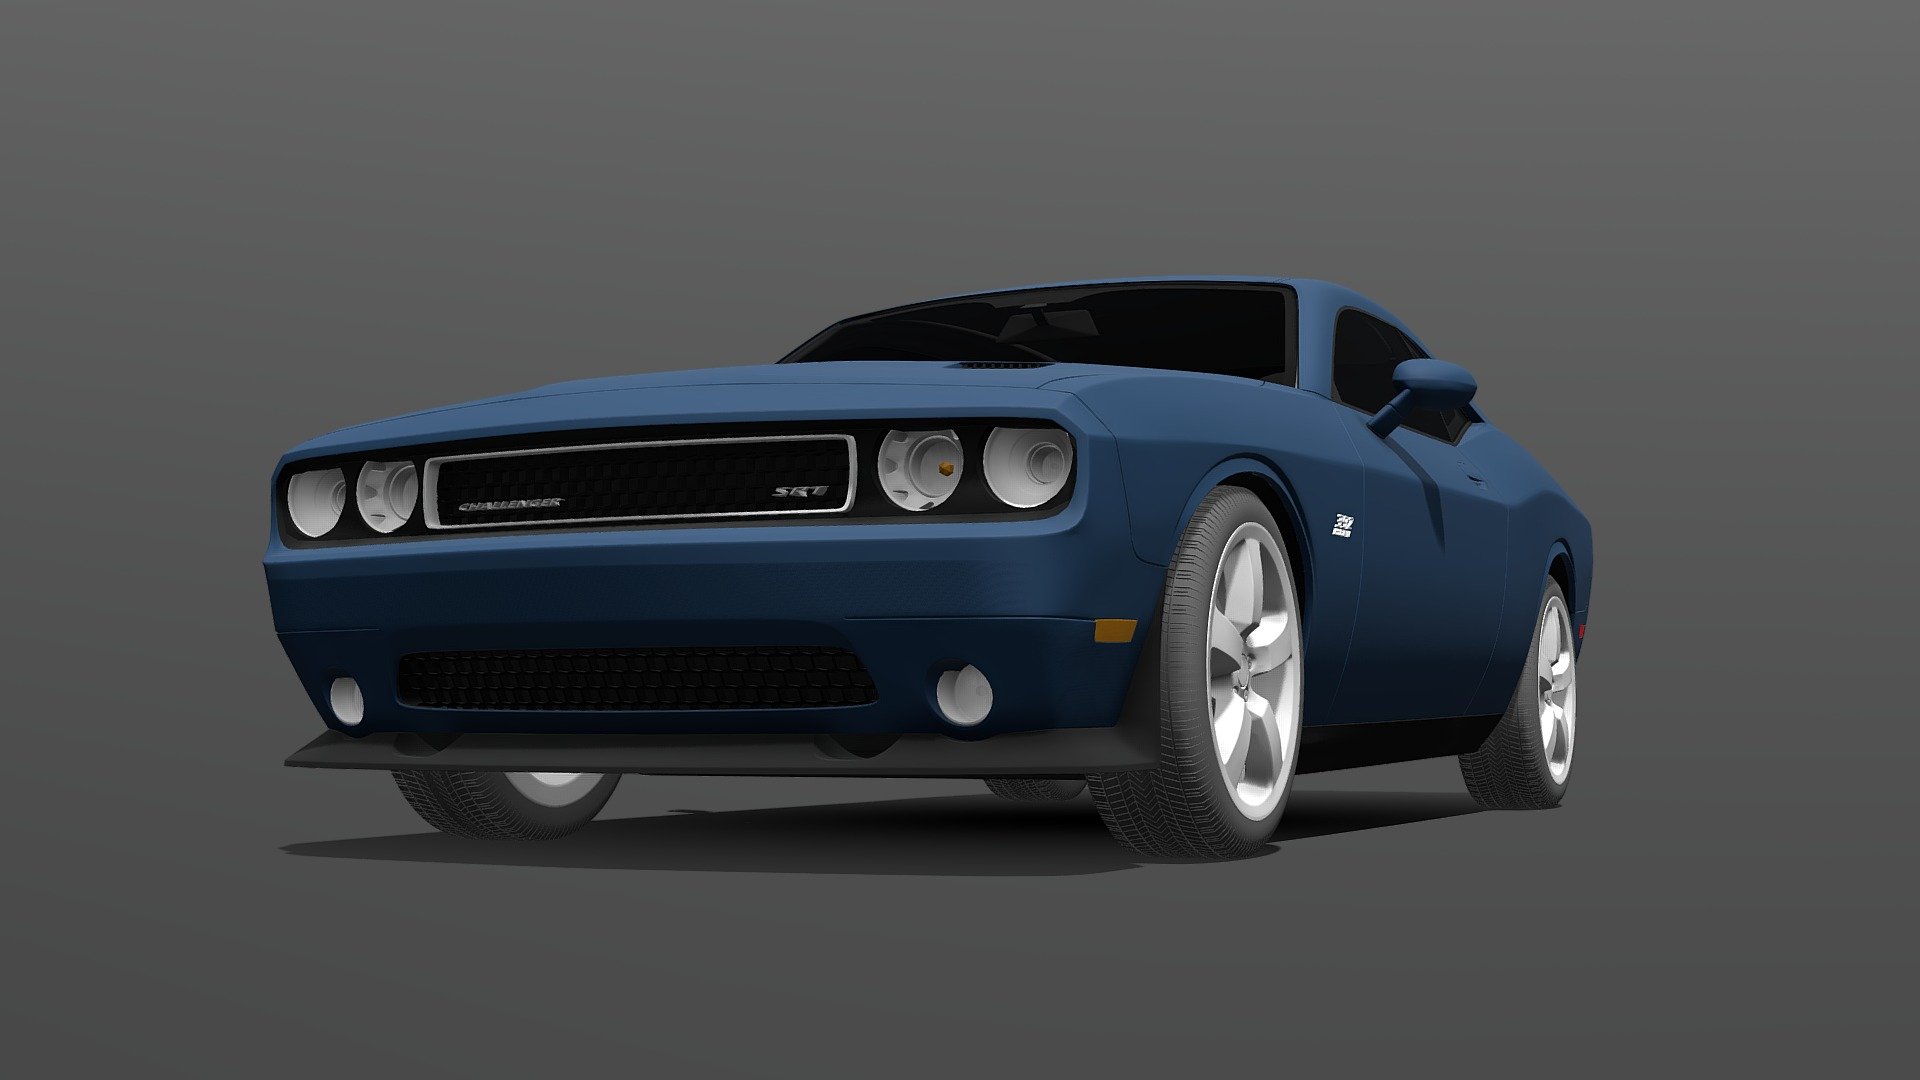 The Dodge Challenger SRT 392 hits a top speed of 182 mph and it can accelerate from 0-60 mph in 4.2 seconds, which is 1.2 seconds faster than the Ford Mustang V6.

The return of the legendary 392-cubic inch HEMI® powertrain back to the street in the Dodge Challenger SRT8 392 provides another step in showcasing the evolution of the performance brand. Pumping out 470 horsepower and 470 lb. -ft.

Both the Scat Pack and the SRT 392 are powerful and capable of delivering impressive performances. In fact, both the SRT 392 and the Scat Pack can achieve 0-60 mph times in the low 4-second range. One thing to note is that the SRT 392 comes with additional performance features compared to the Scat Pack 3d model